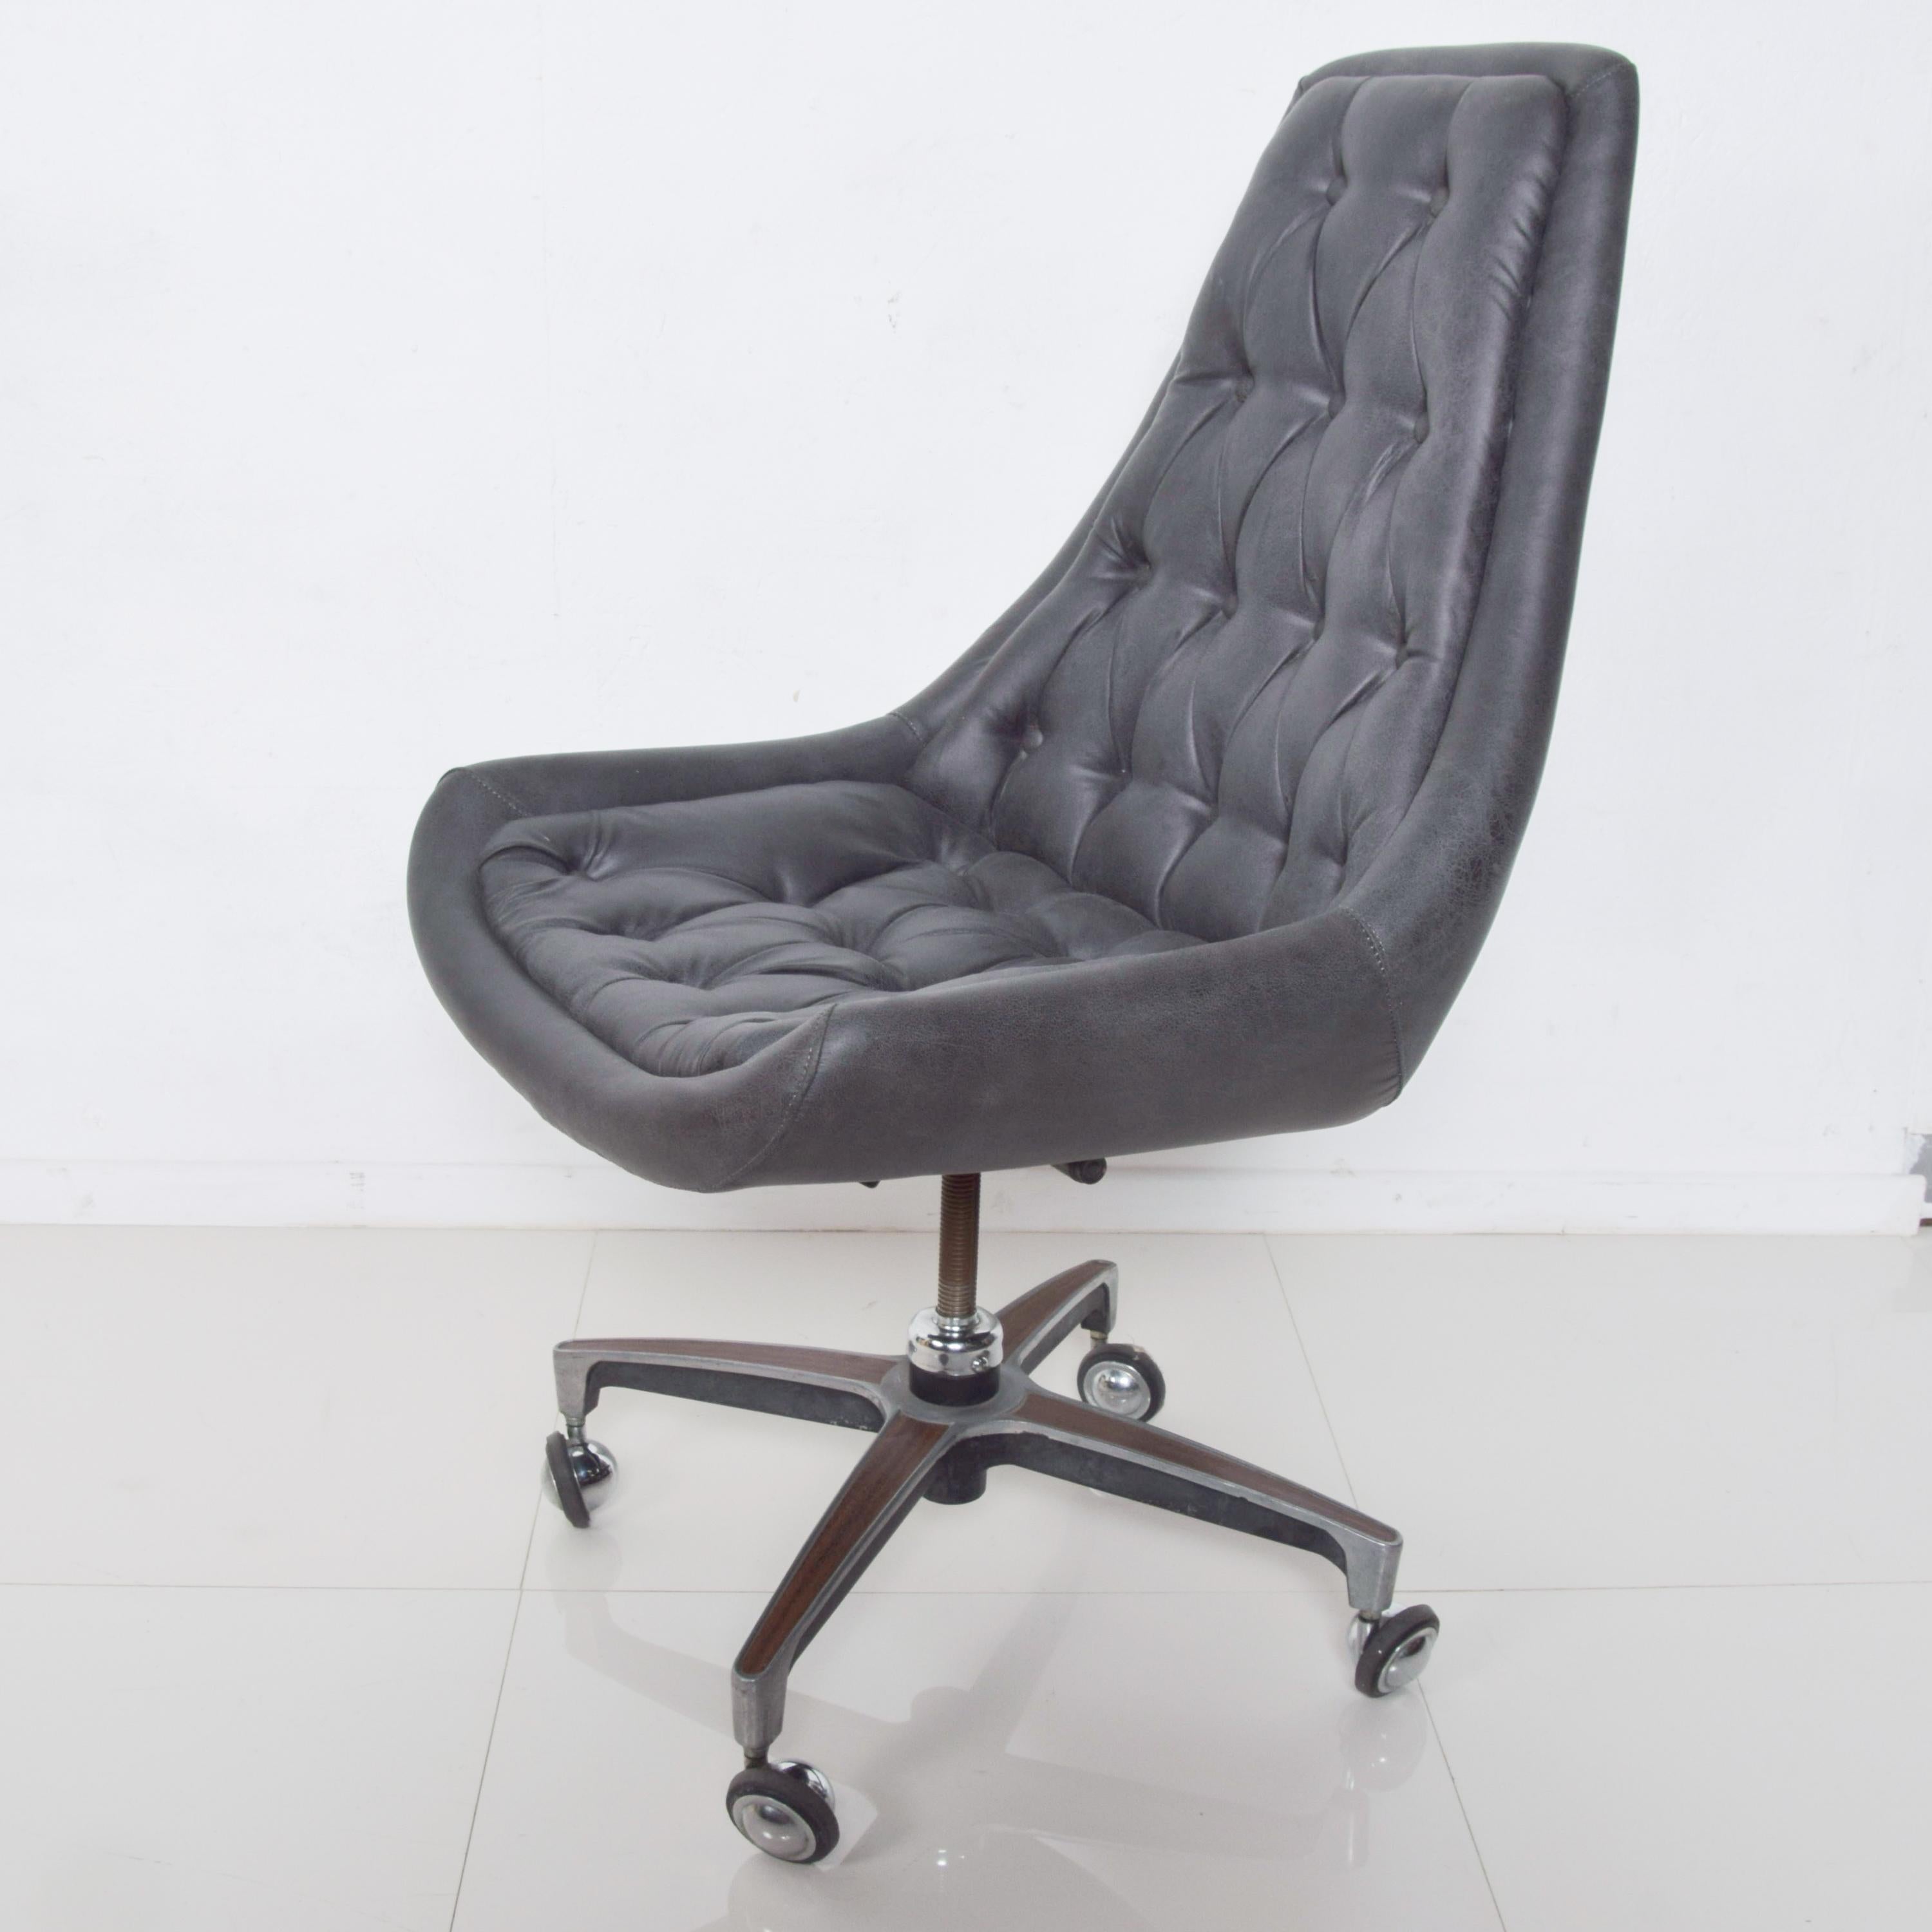 Mid-Century Modern Classic Chromcraft navy blue faux leather swivel office desk chair on casters
New Upholstery. Original preowned vintage condition. 
Features adjustable height. Space age design.
Similar to Sculpta space age swivel star trek chair